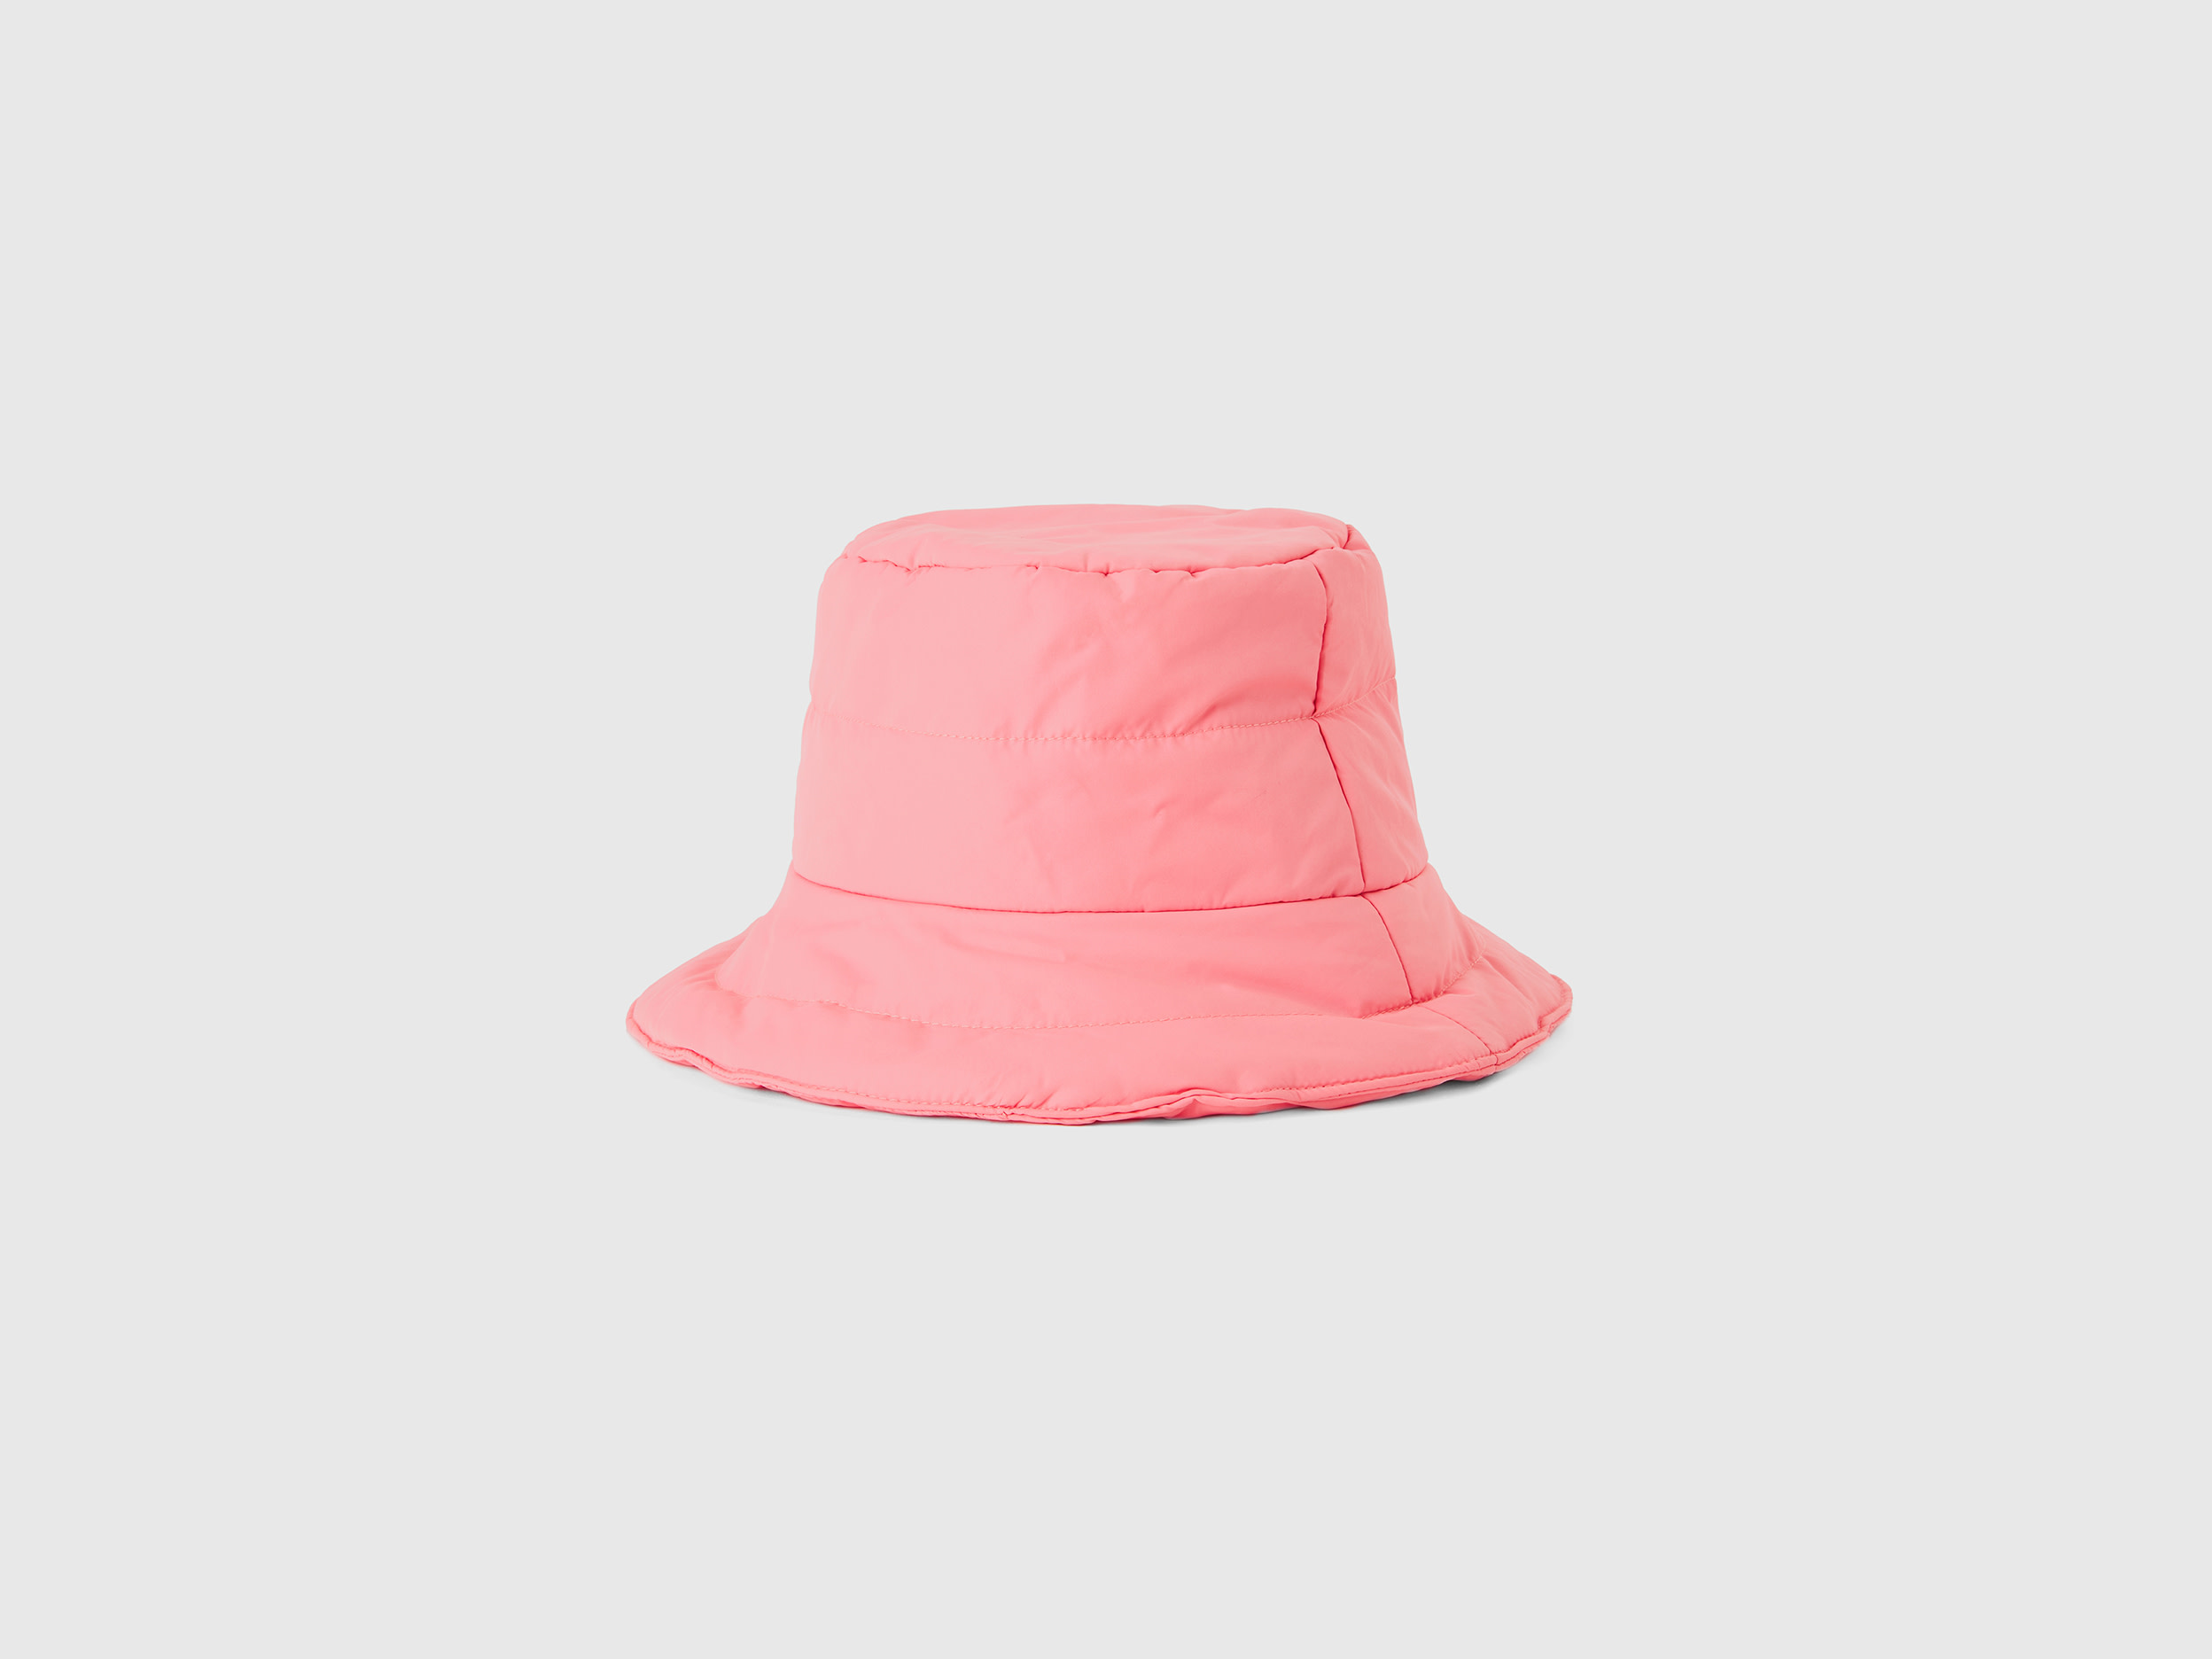 Benetton, Quilted Padded Hat, size OS, Pink, Women